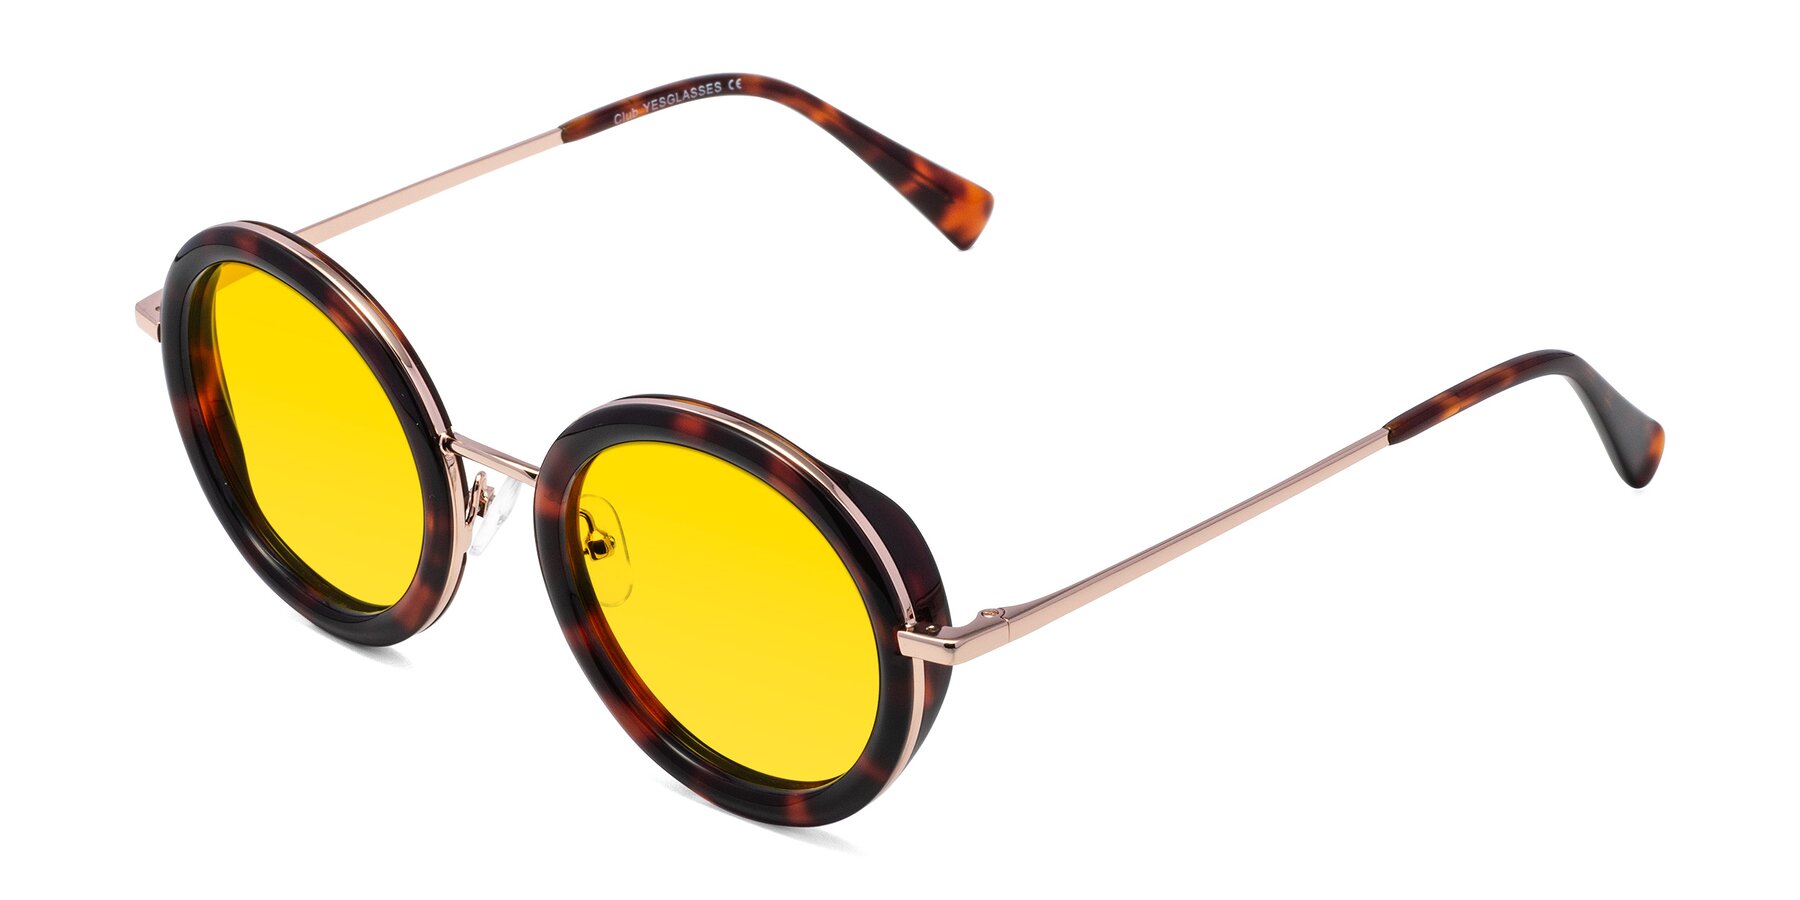 Angle of Club in Tortoise-Rose Gold with Yellow Tinted Lenses